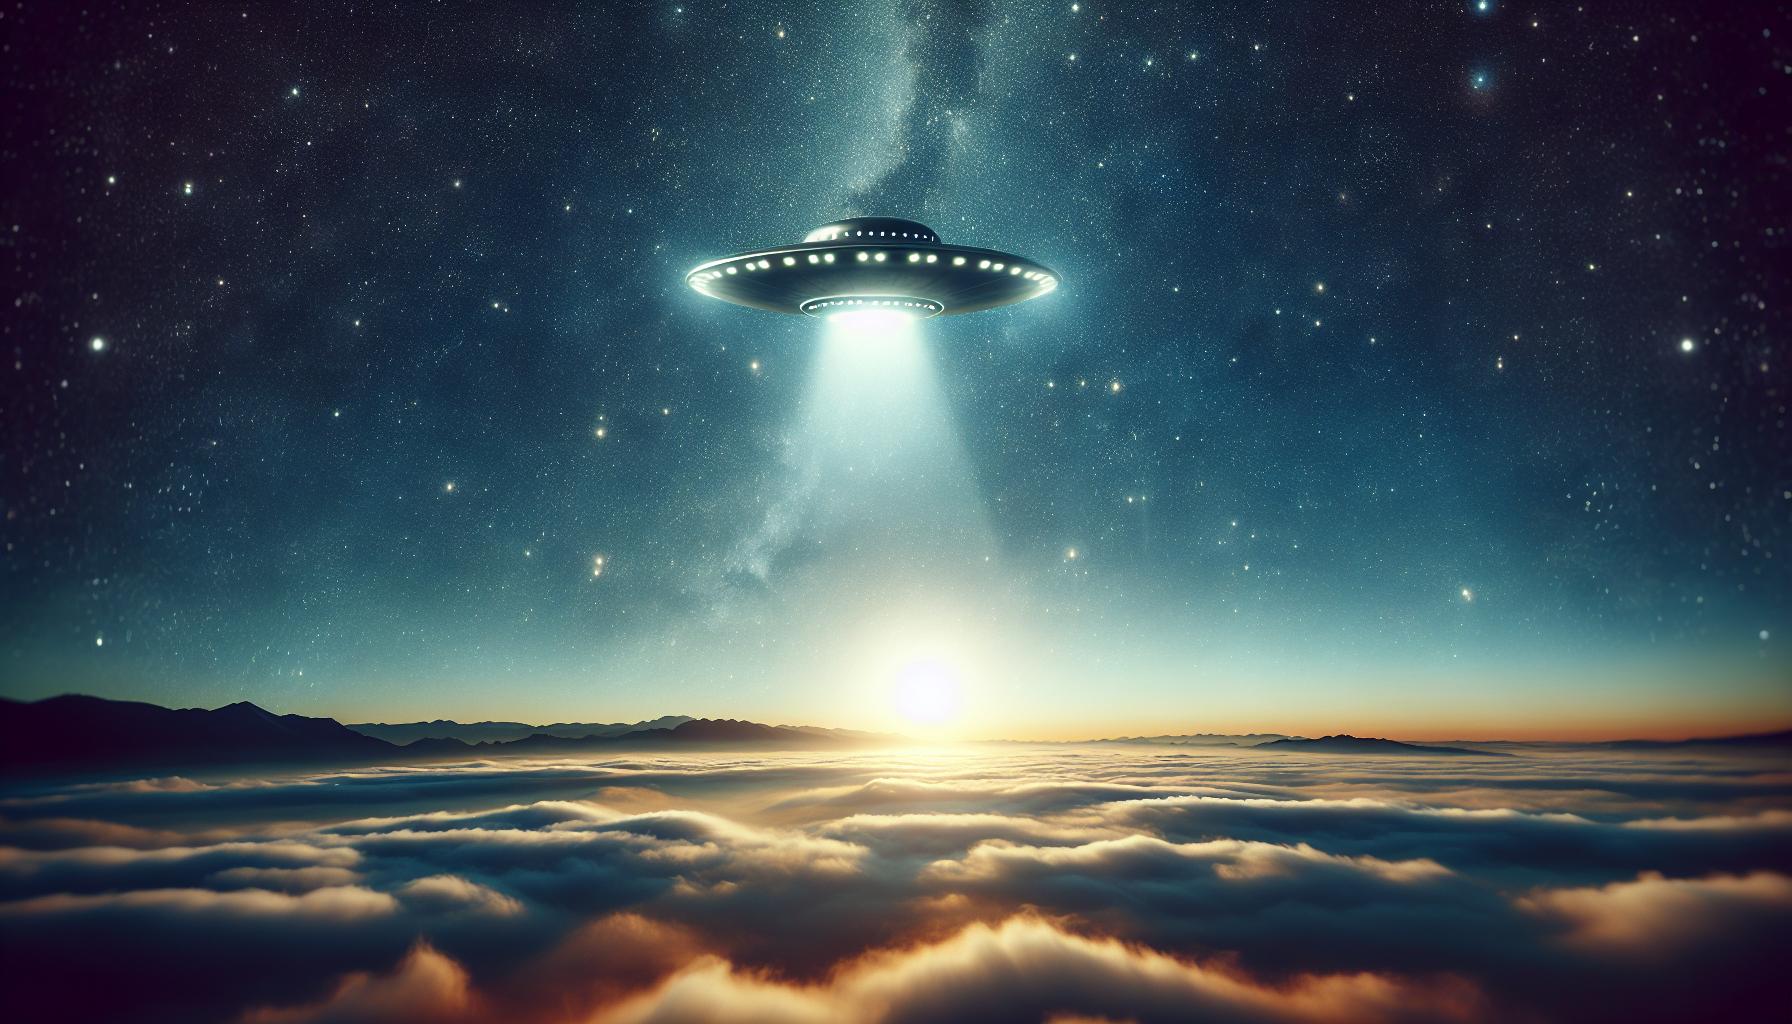 What Does A Ufo Look Like In The Sky